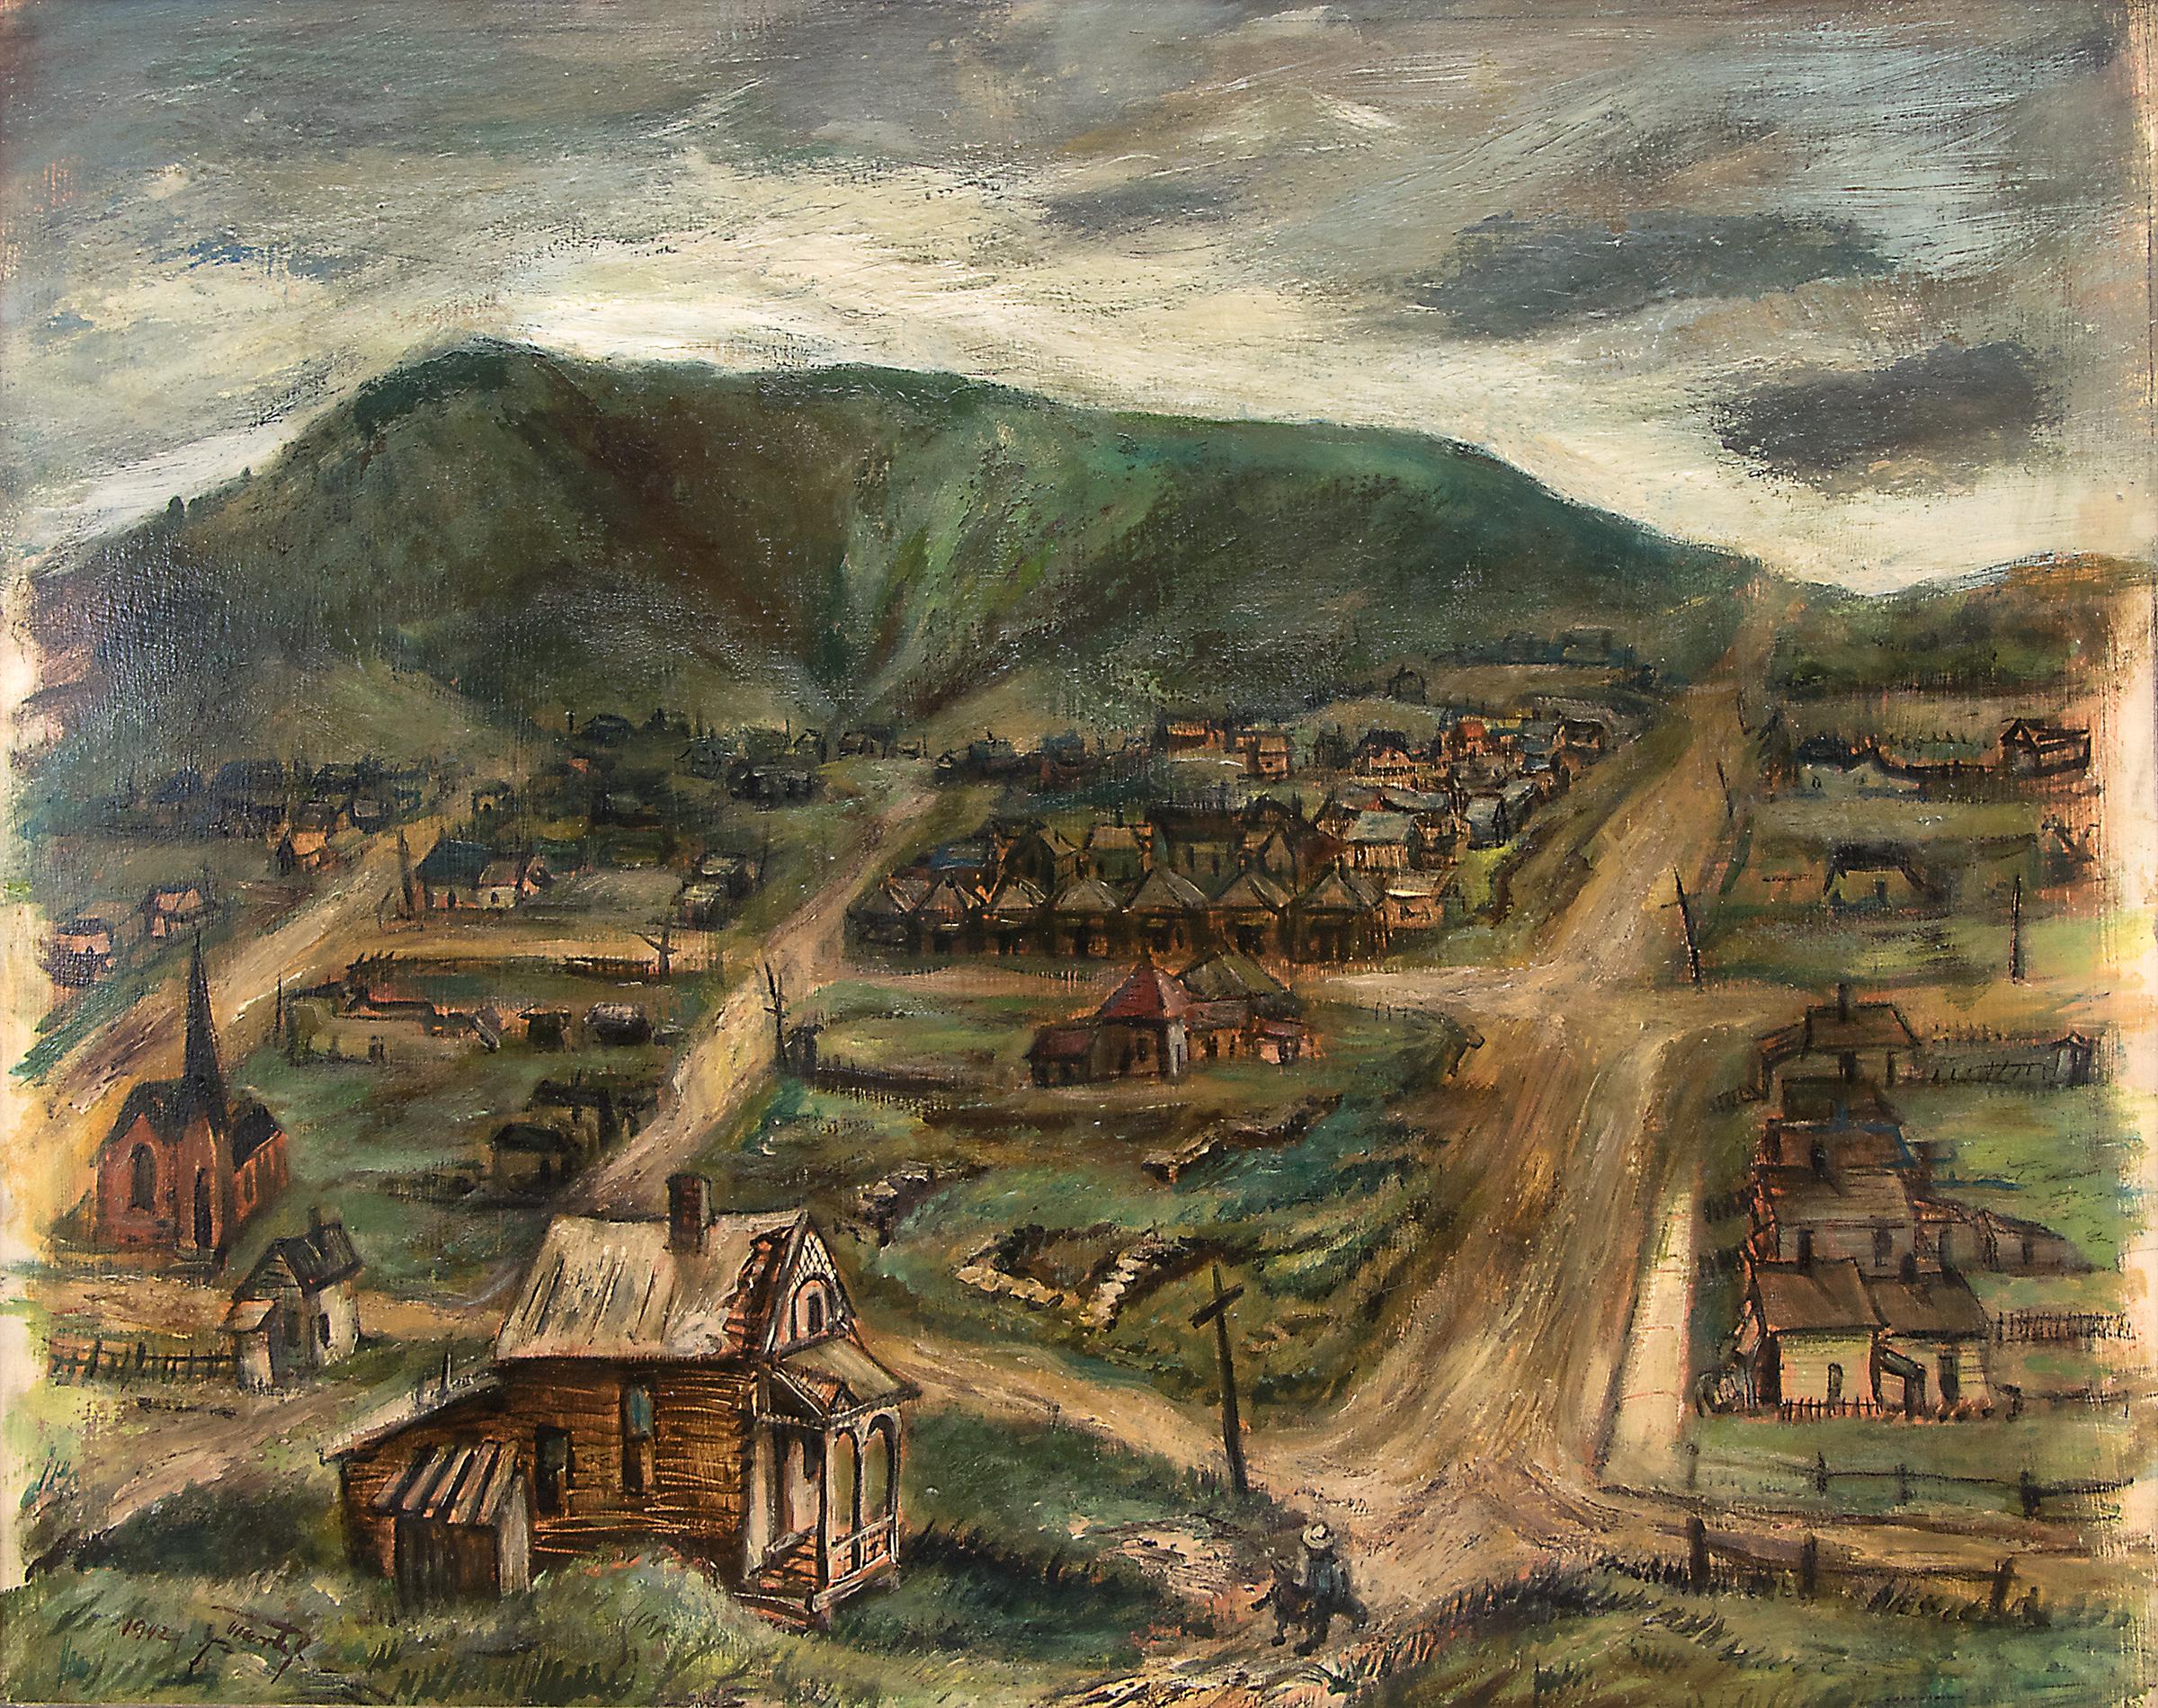 Victor, Colorado, 1940s Modernist Mountain Landscape with Town, Mining Town - Painting by Martyl Suzanne Schweig Langsdorf